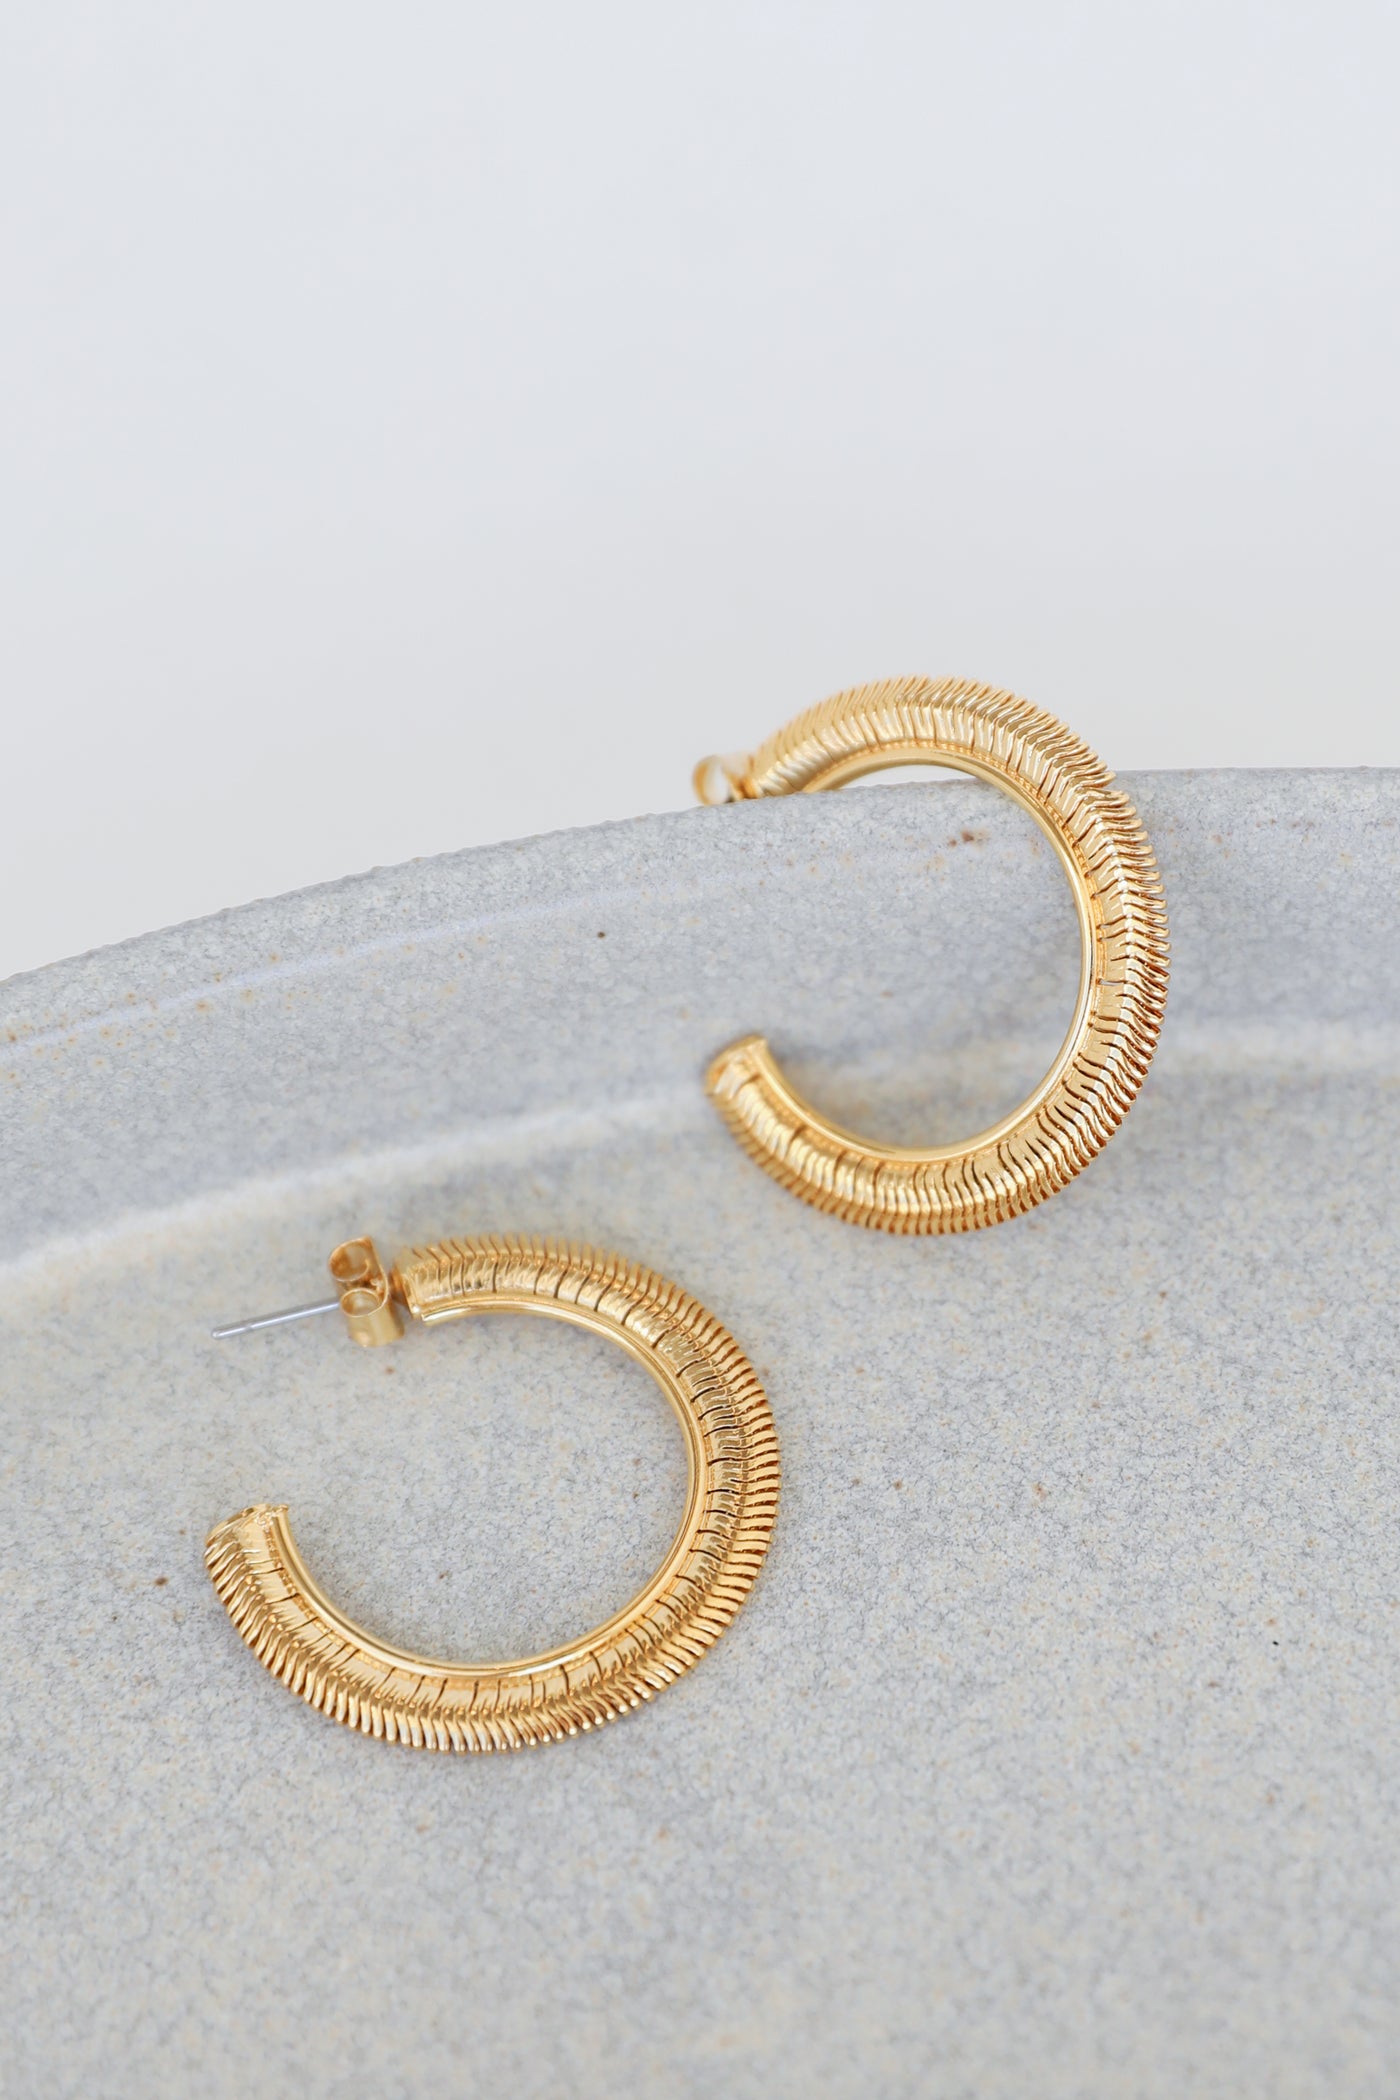 Gold Snake Chain Hoop Earrings close up